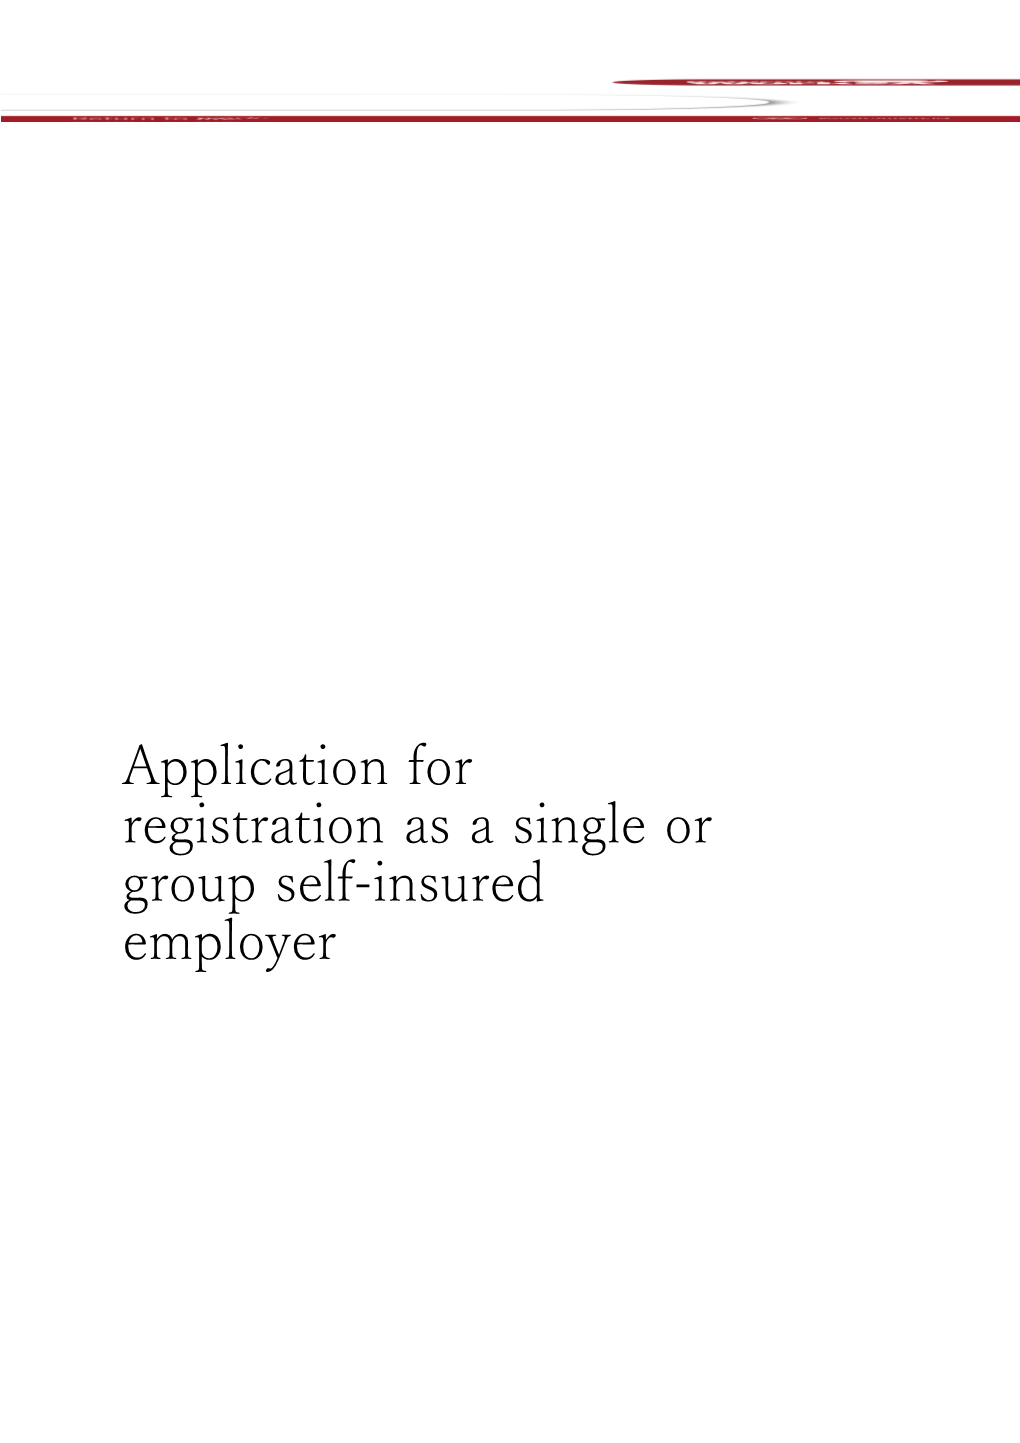 Application for Registration As a Single Or Group Self-Insured Employer